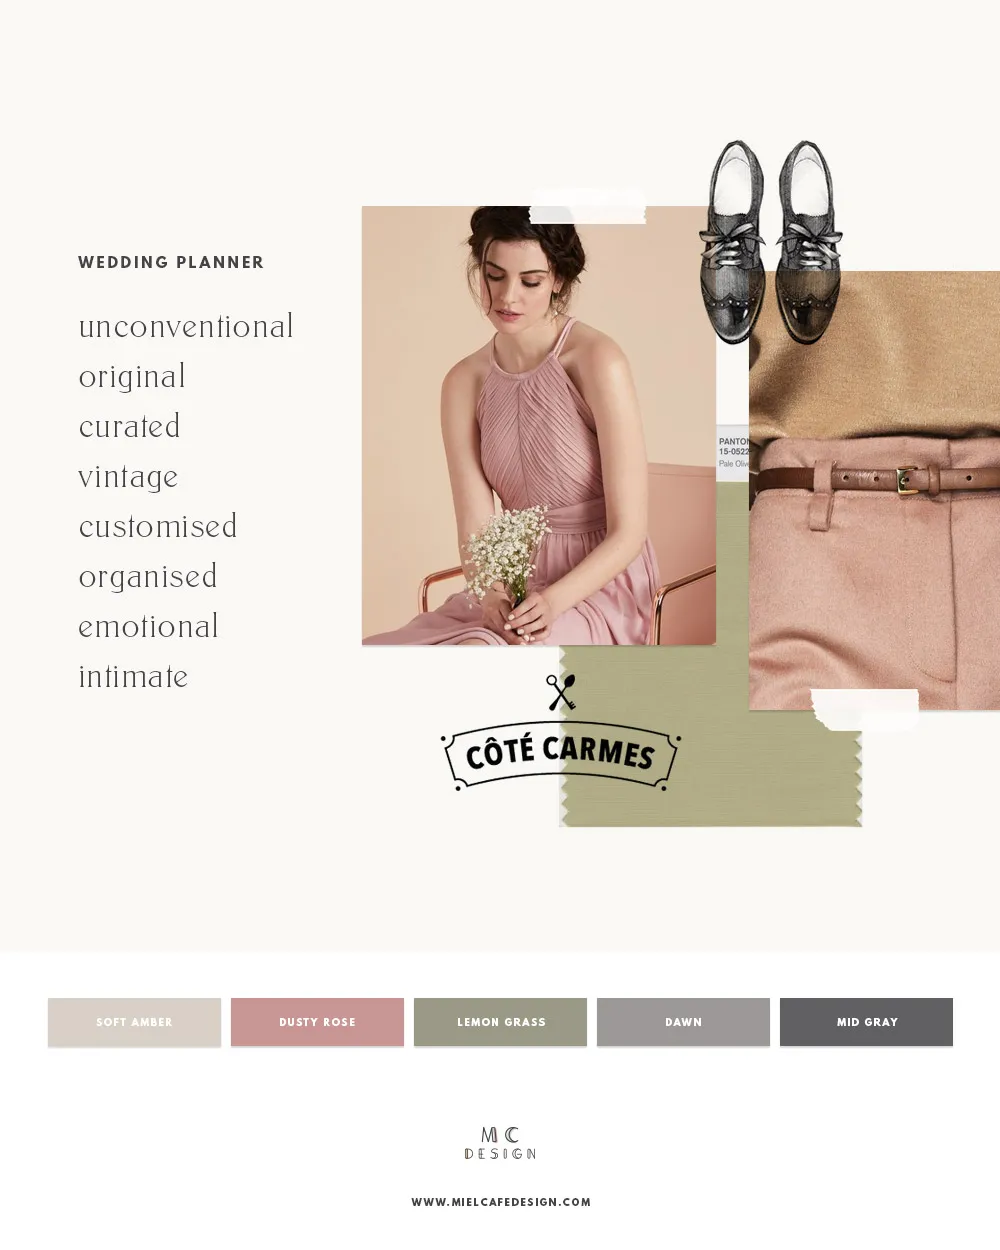 How to create your wedding planner brand - Visualise: unconventional, original, intimate, vintage wedding planner mood board and color palette